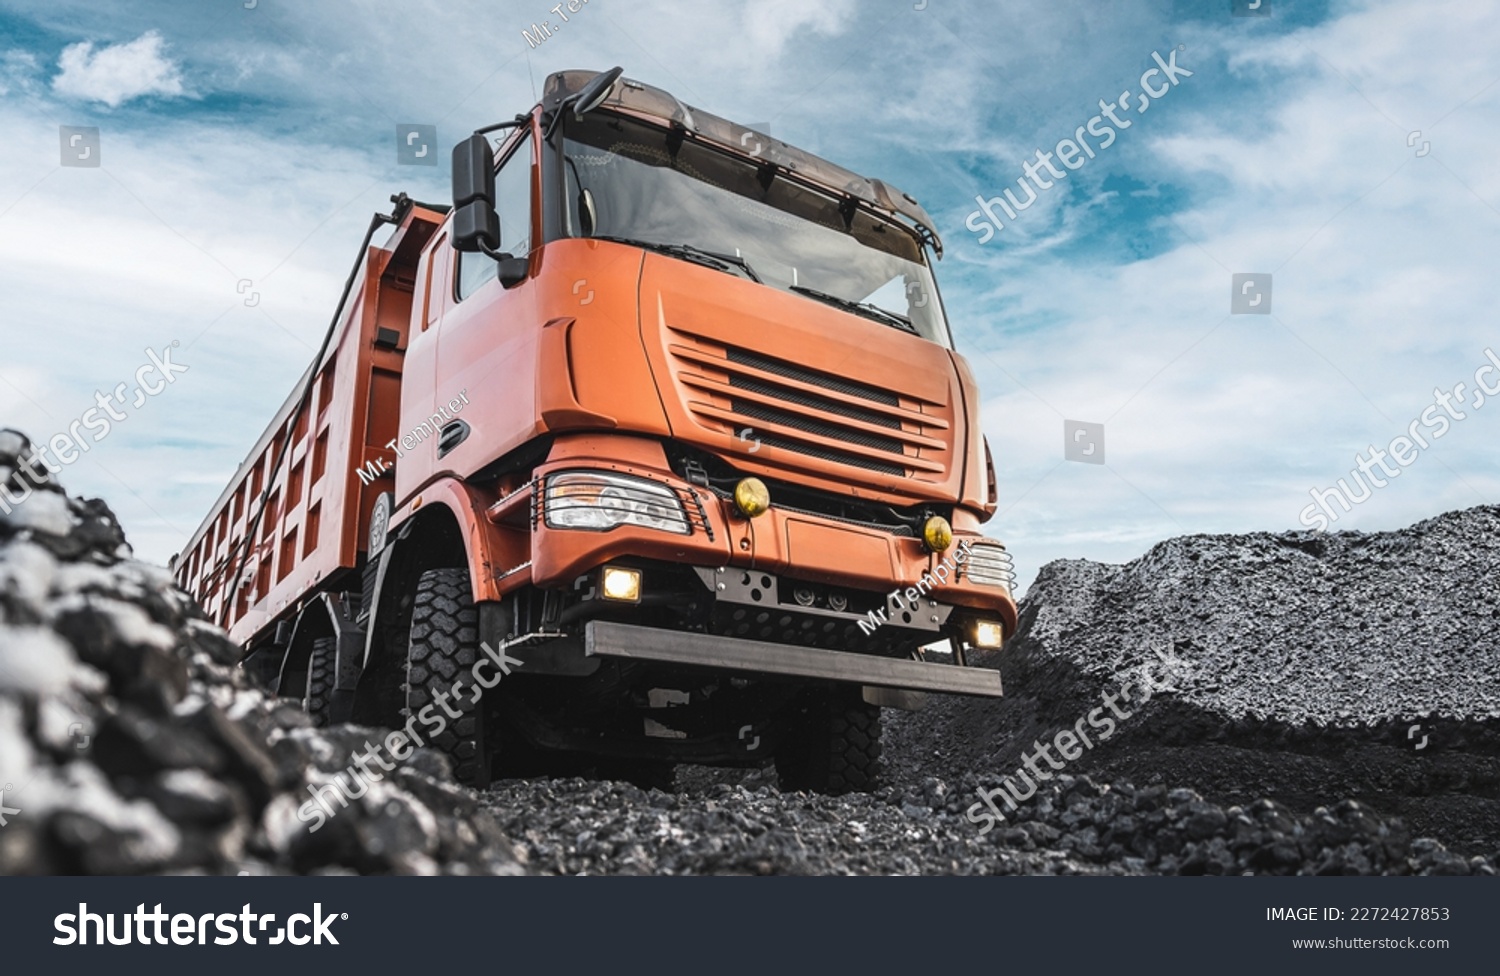 Large quarry dump truck. Dump truck carrying coal, sand and rock. Trucks moving on dirt country road in forest. Mining truck mining machinery to transport coal from open-pit. Transportation of mineral #2272427853